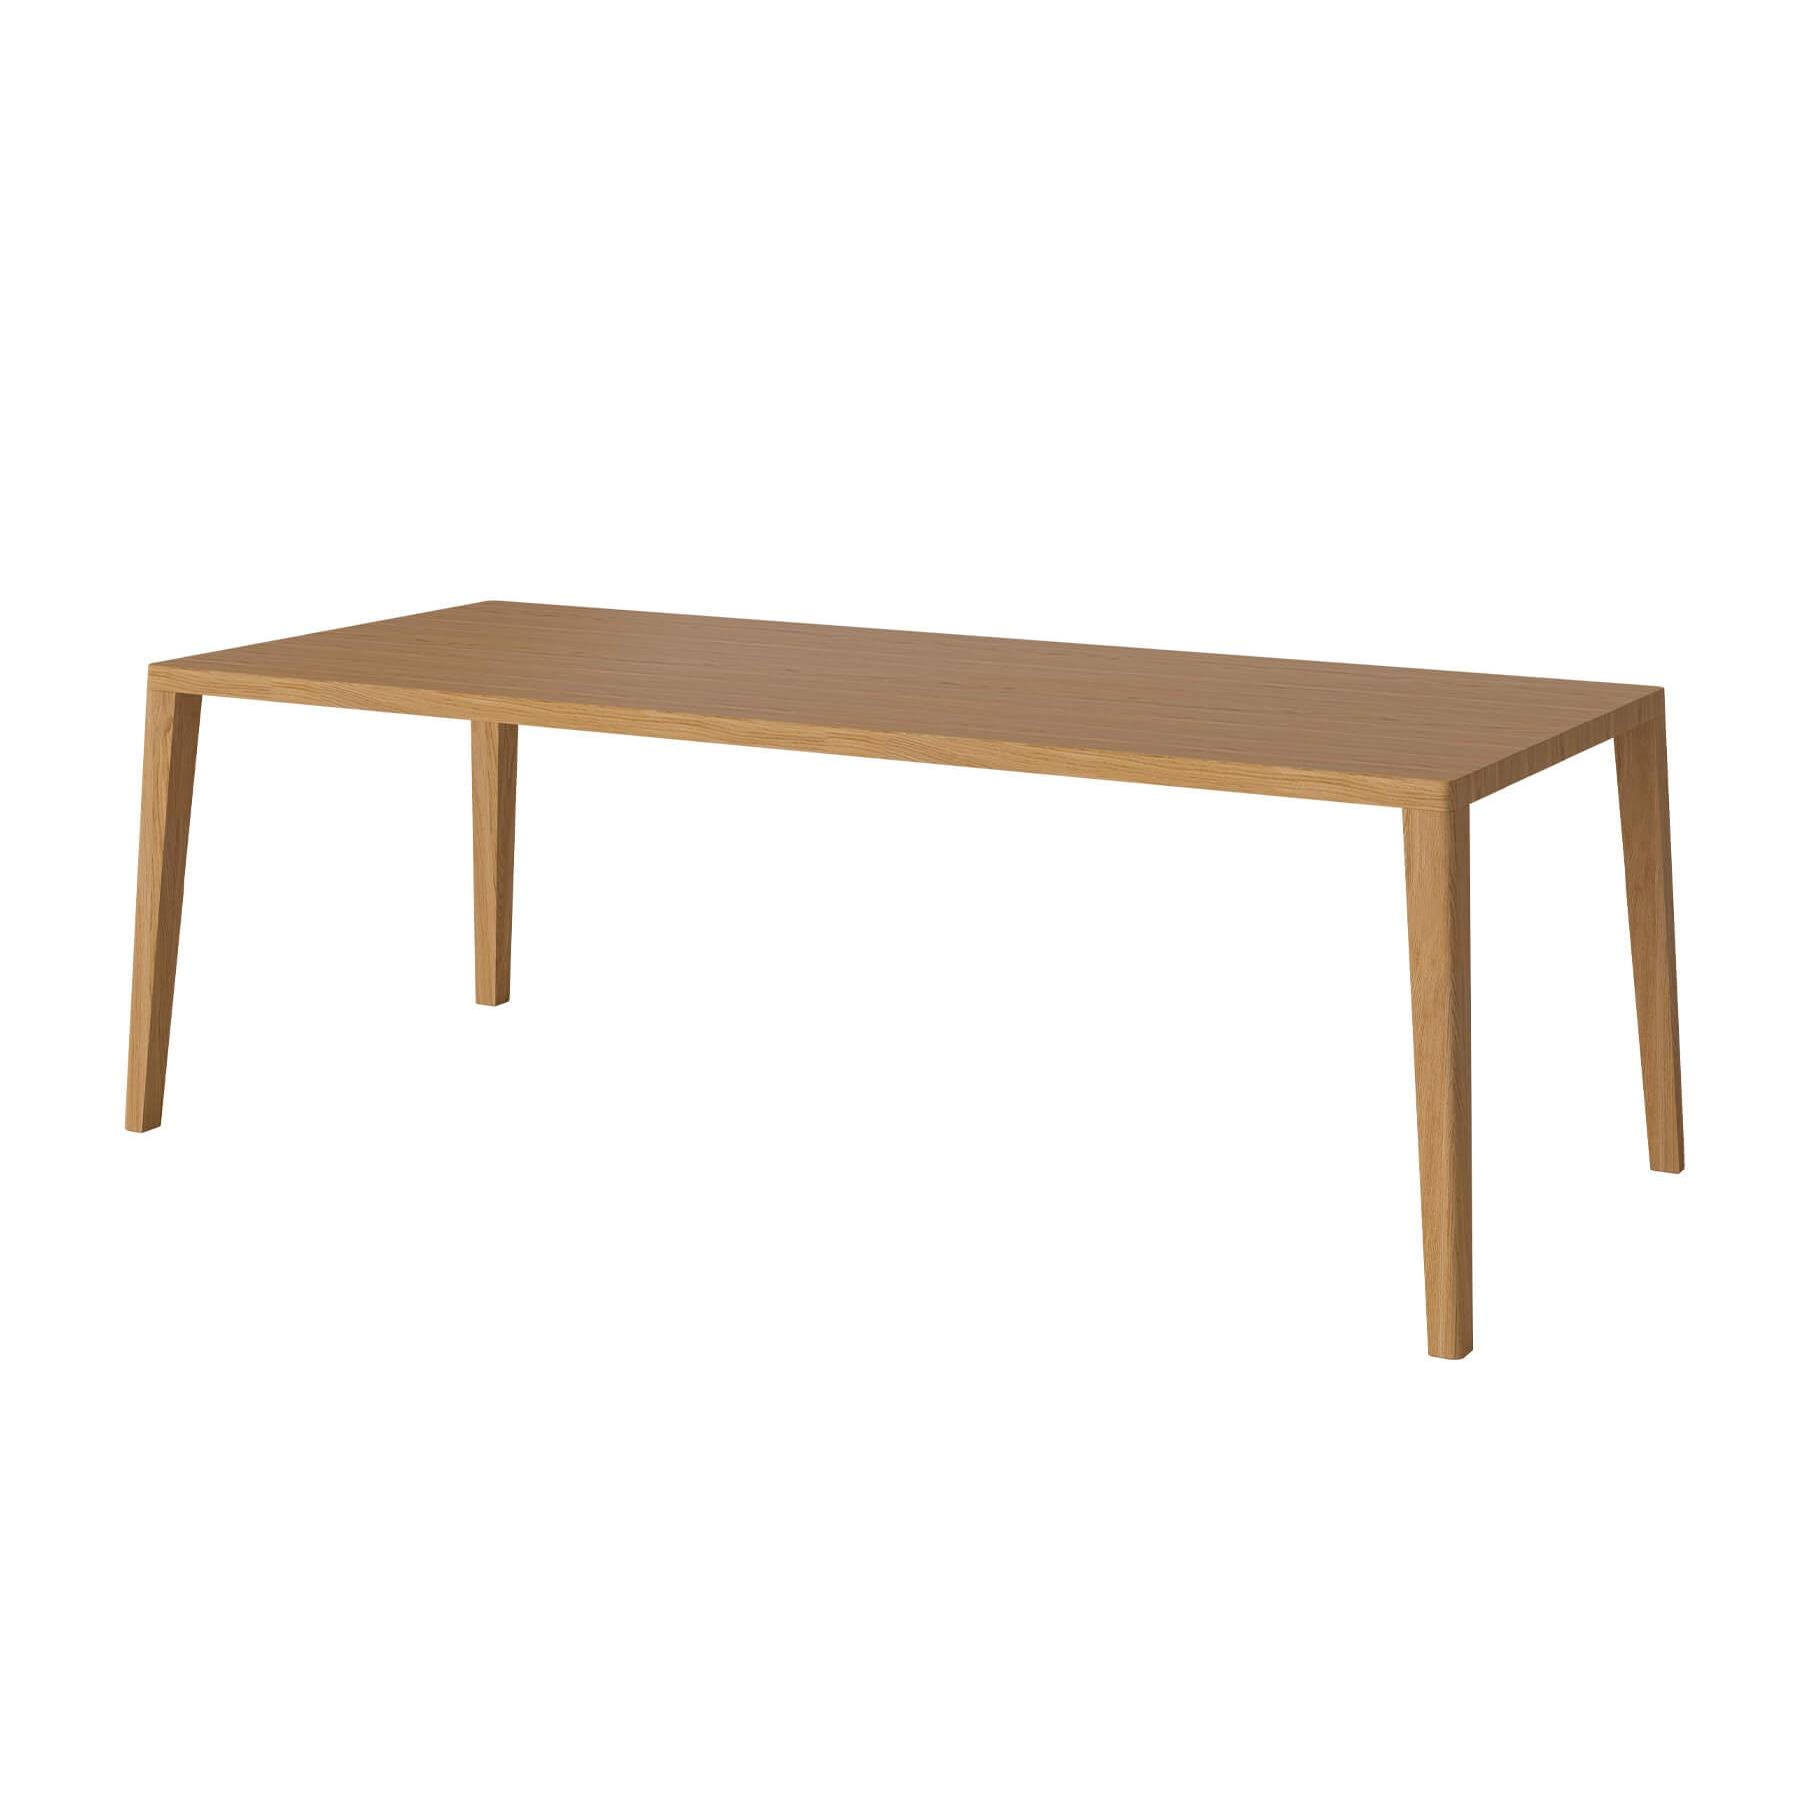 Bolia Graceful Dining Table 220 X 95cm Oiled Legs Without Extension Leaves Light Wood Designer Furniture From Holloways Of Ludlow